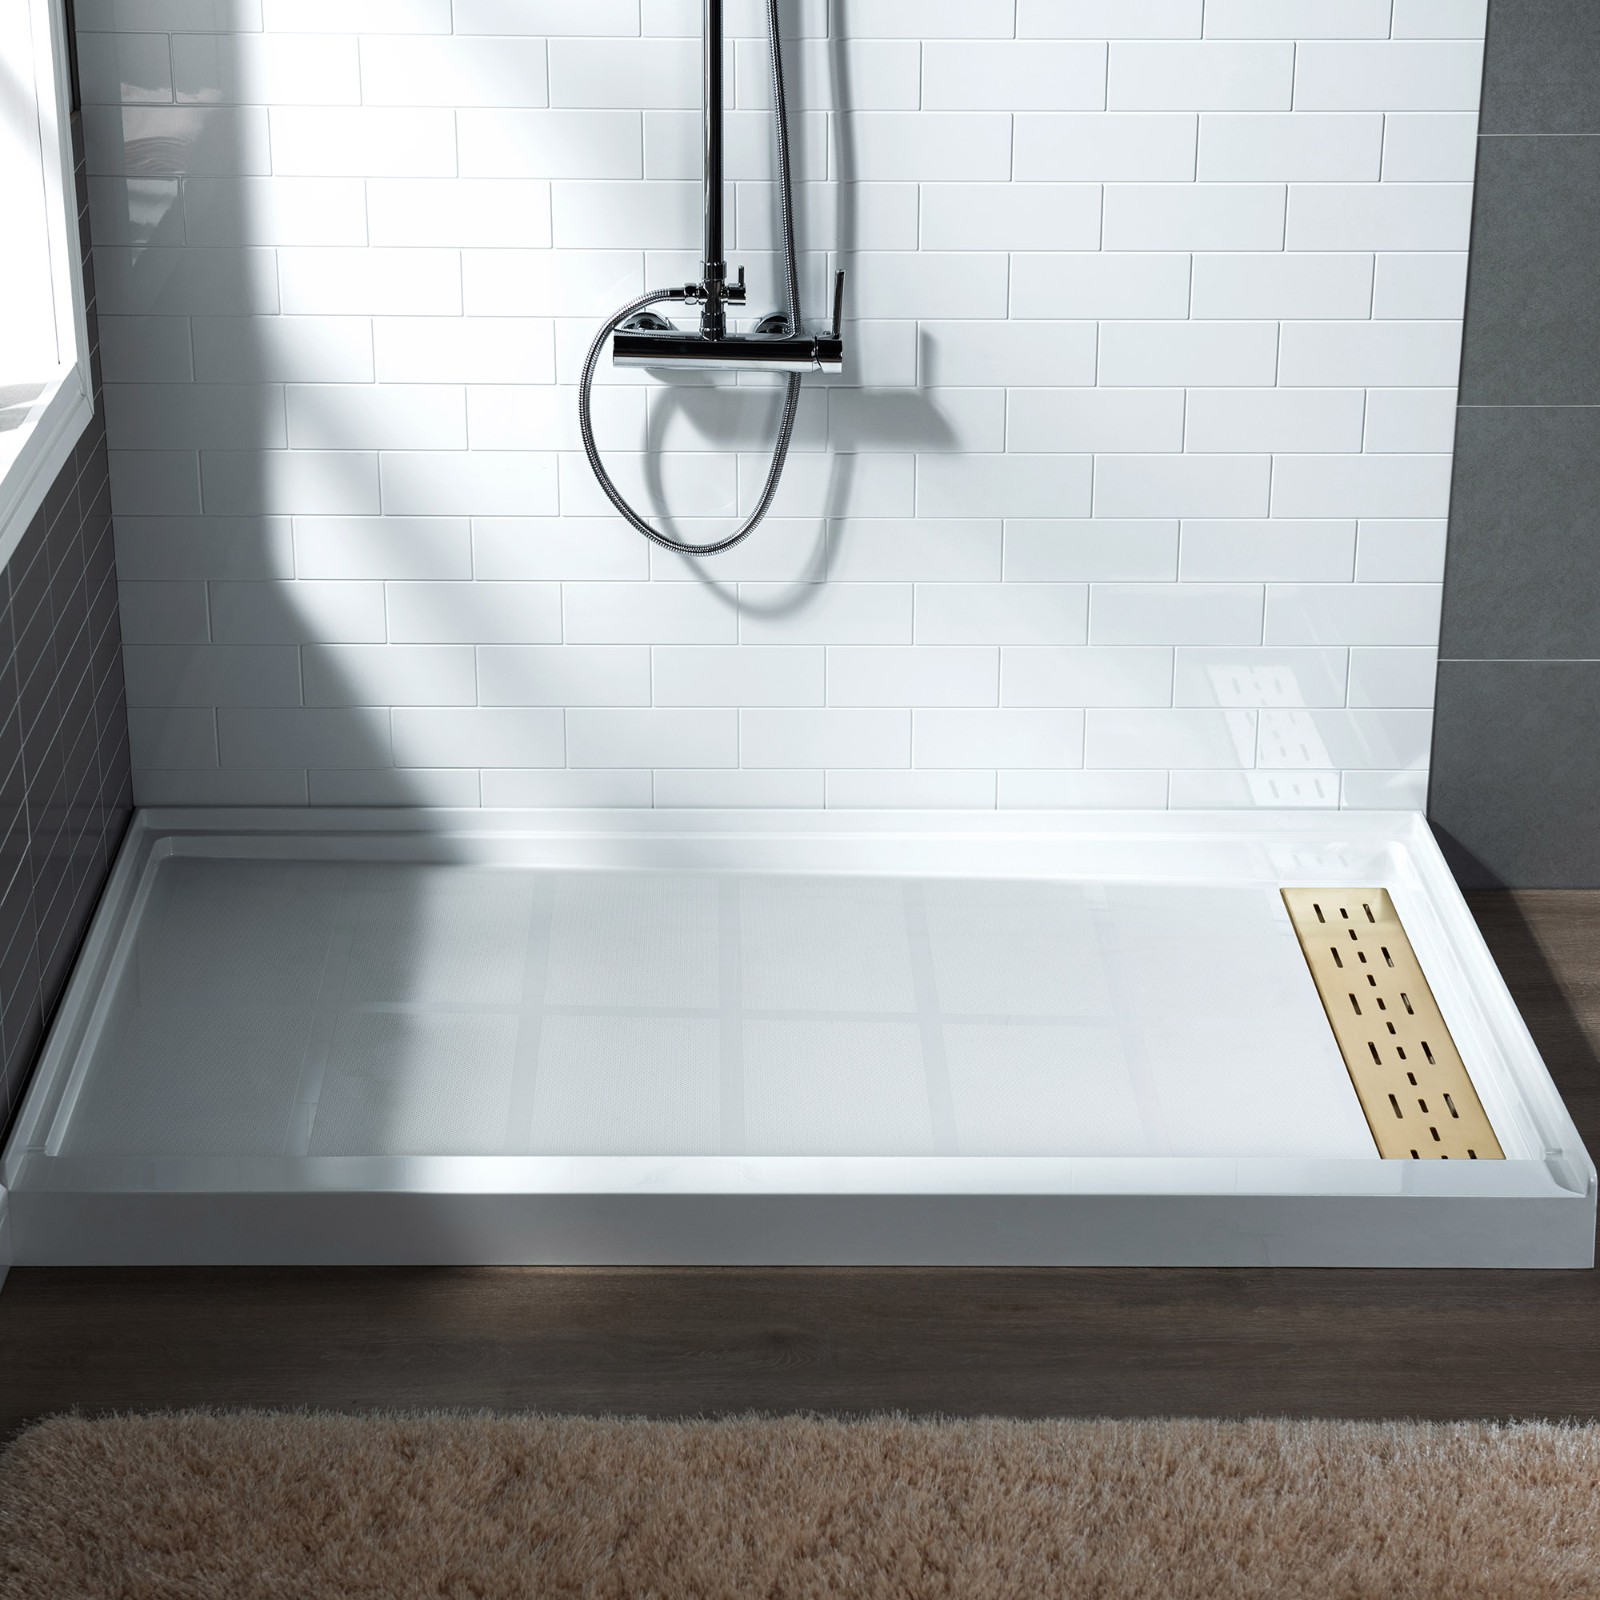  WOODBRIDGE SBR6030-1000R-BG SolidSurface Shower Base with Recessed Trench Side Including Brushed Gold Linear Cover, 60